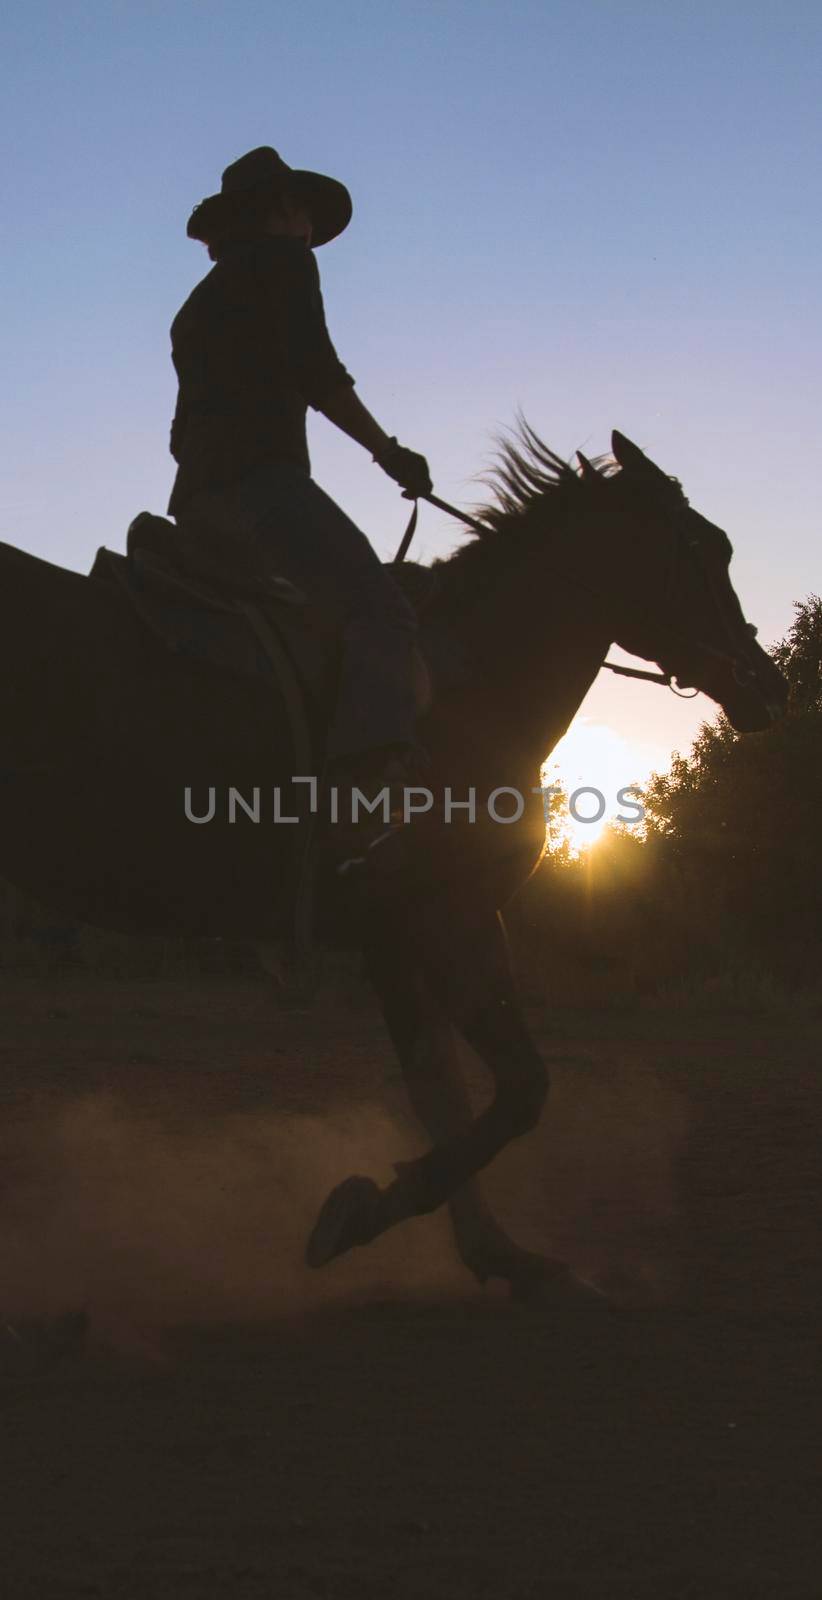 Silhouette of a woman in cowboy hat riding a horse - sunset or sunrise, horizontal by Studia72